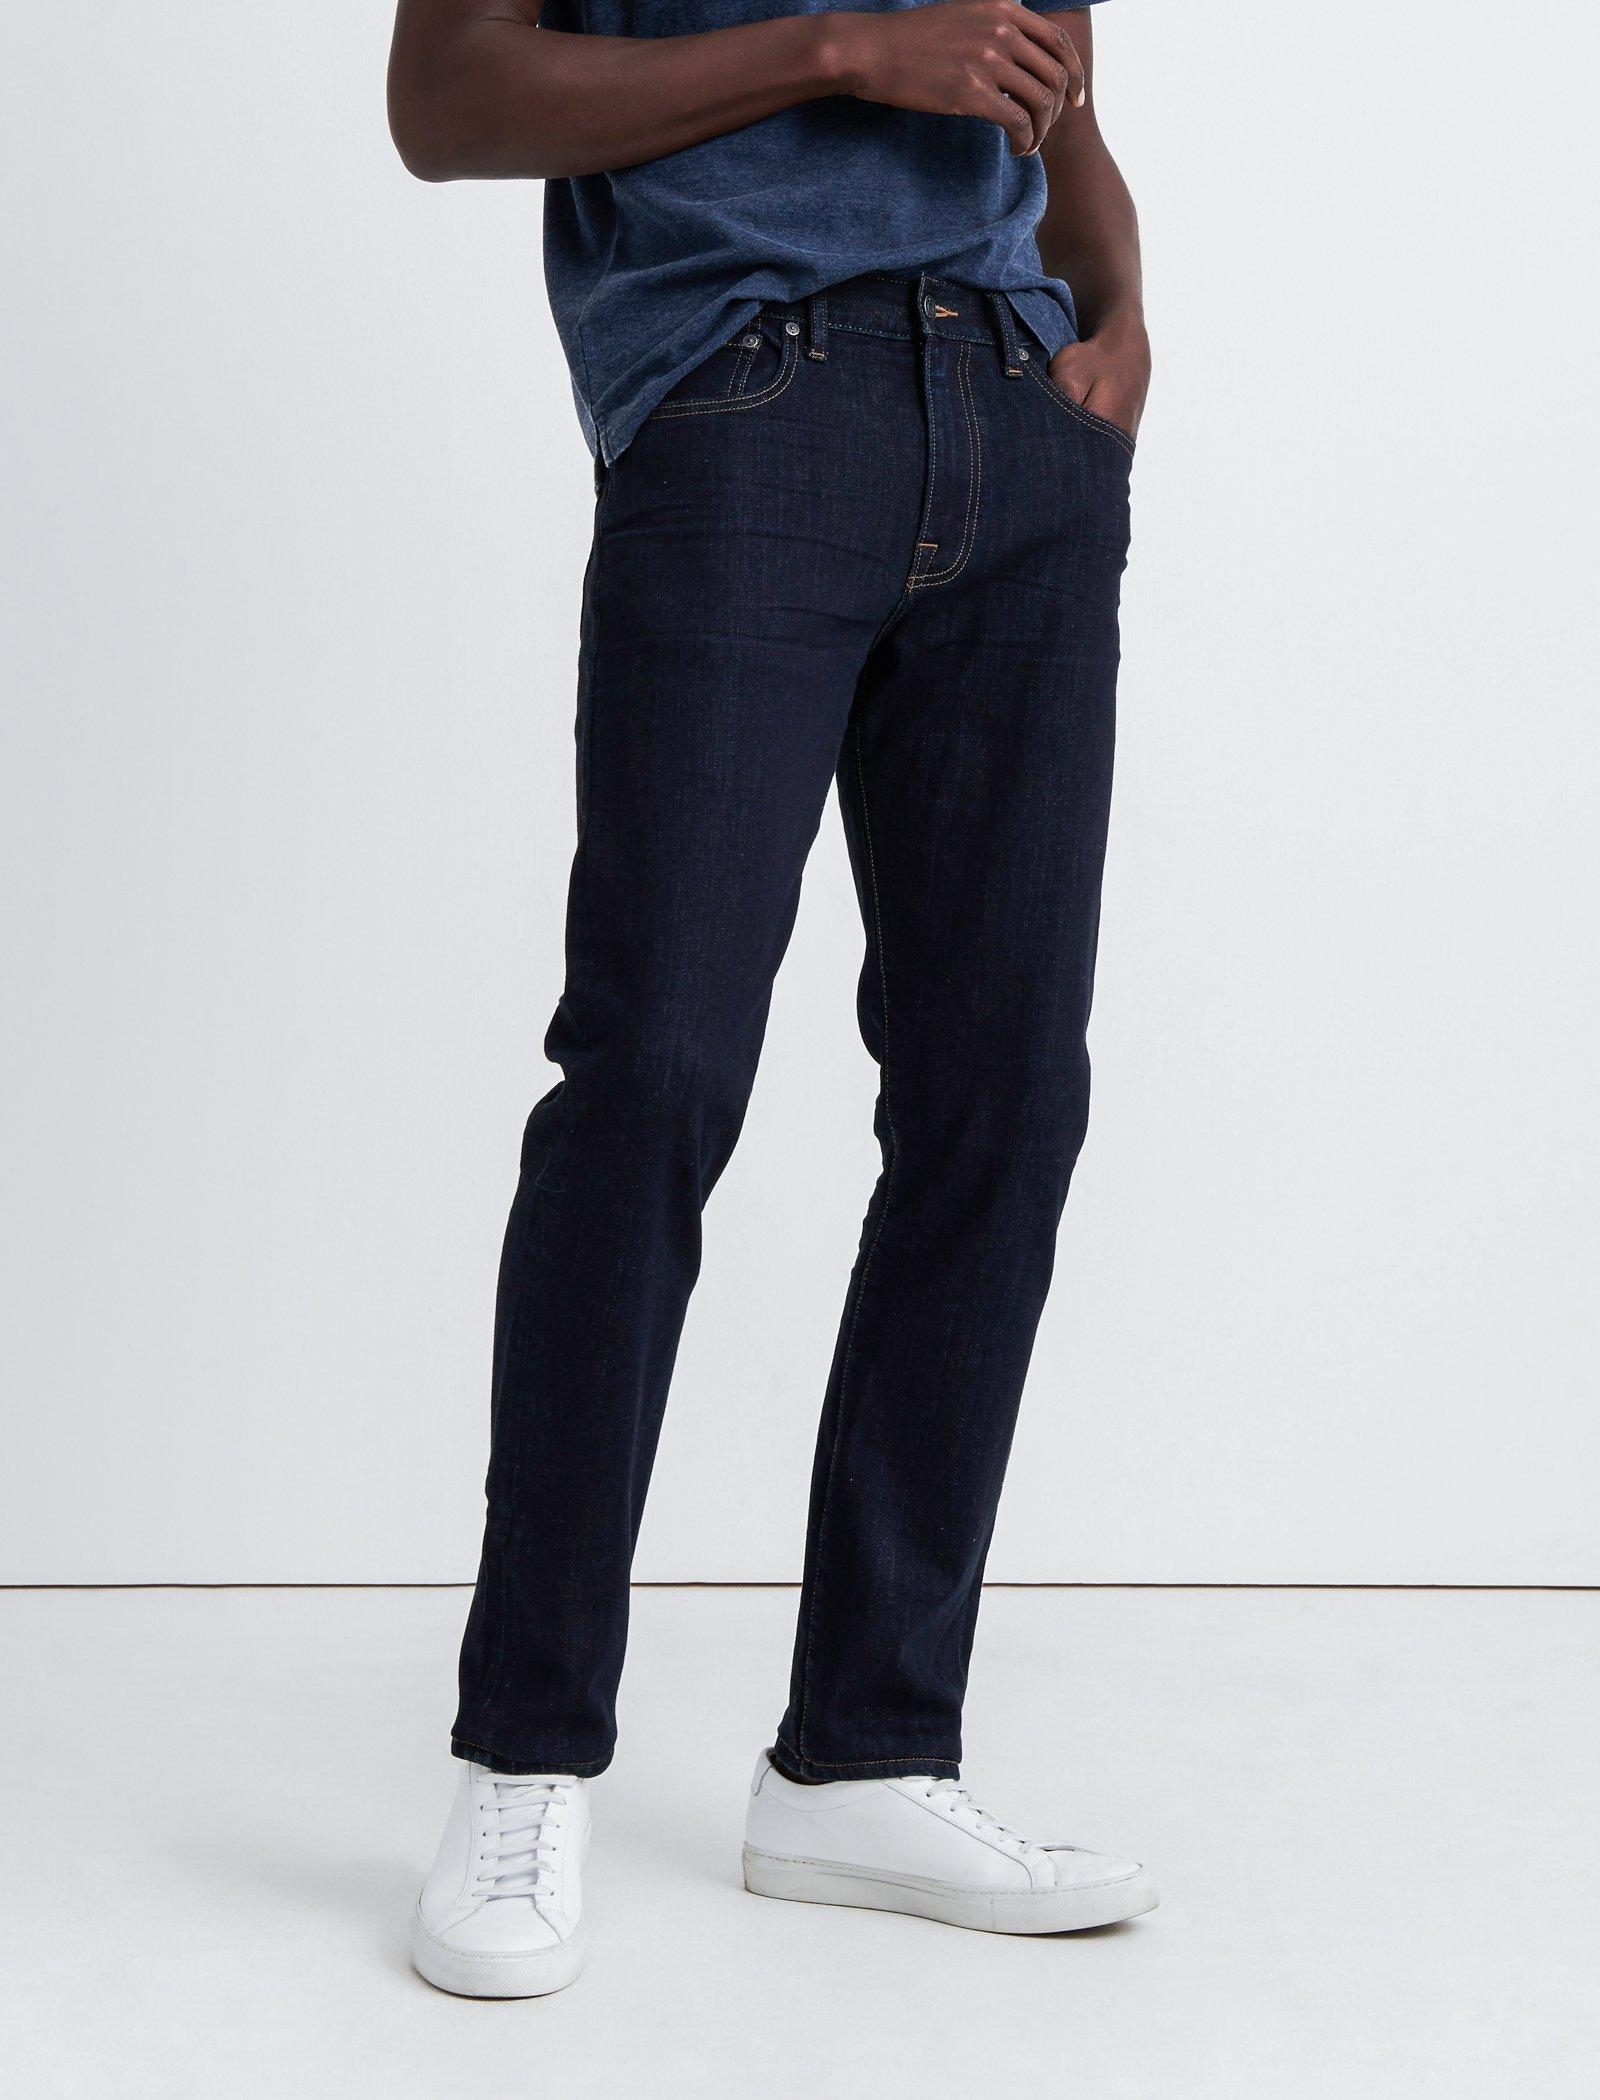 mens lucky brand jeans clearance